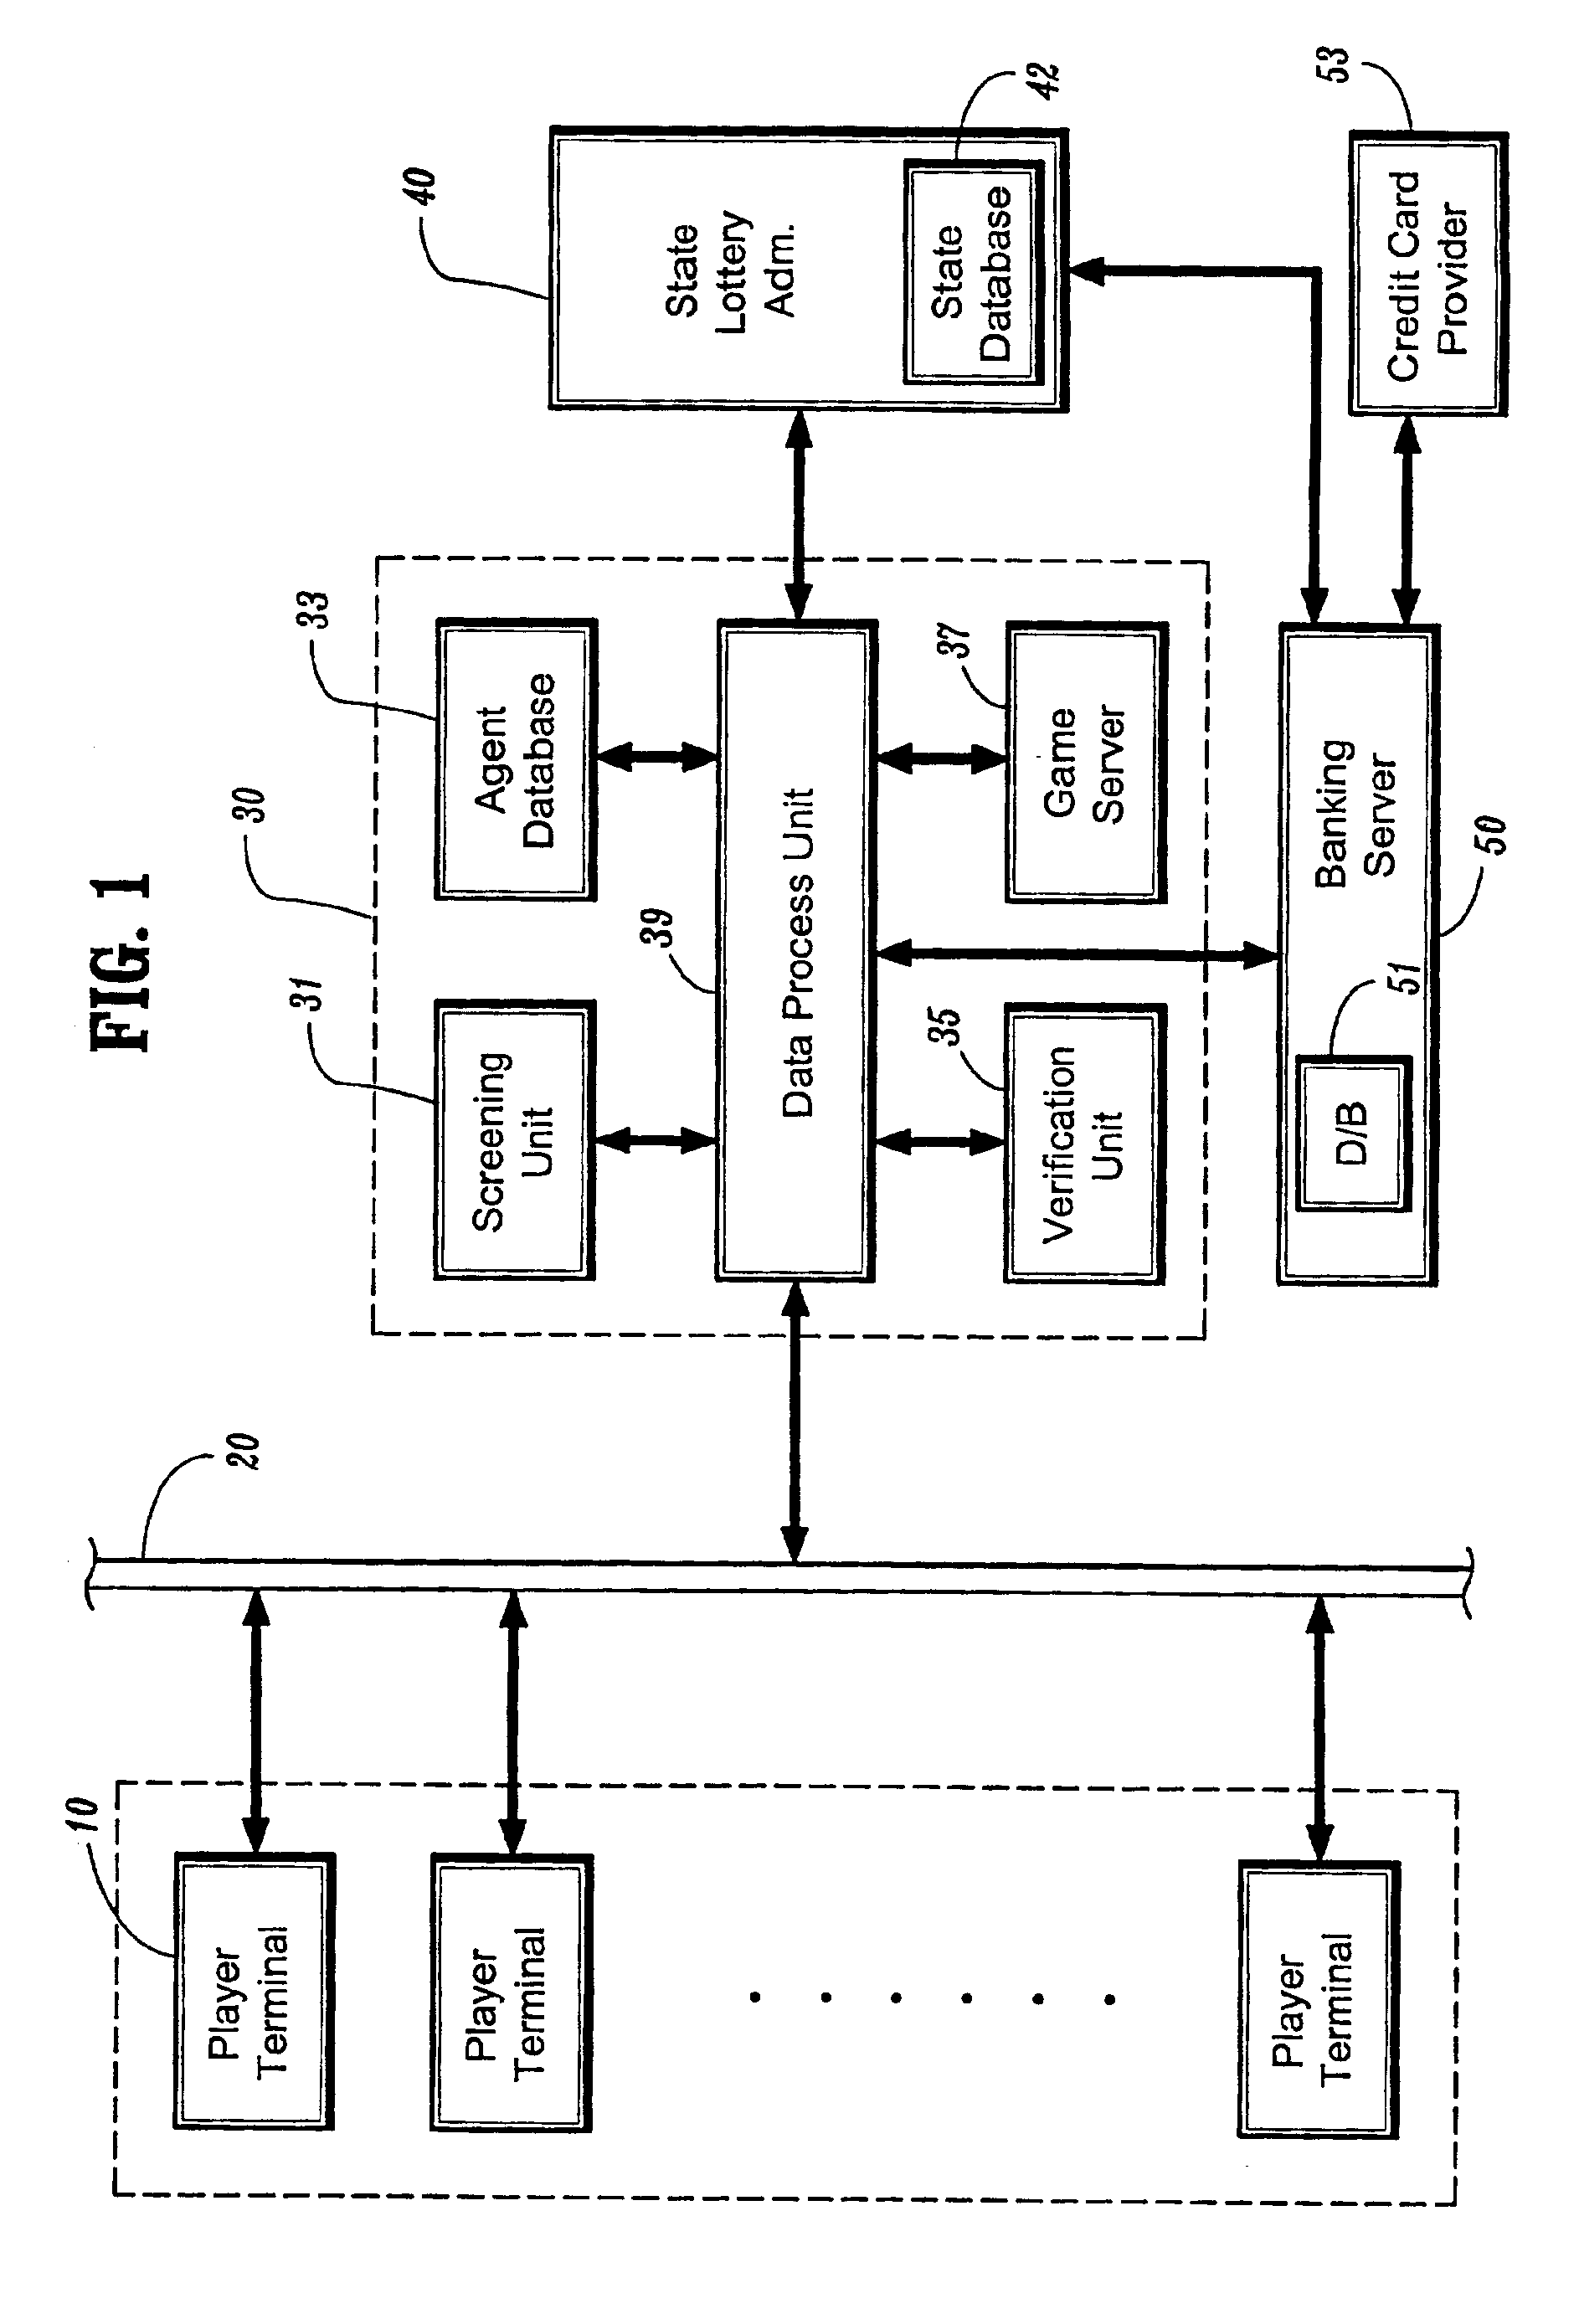 System and a method for operating on-line governmental lottery games